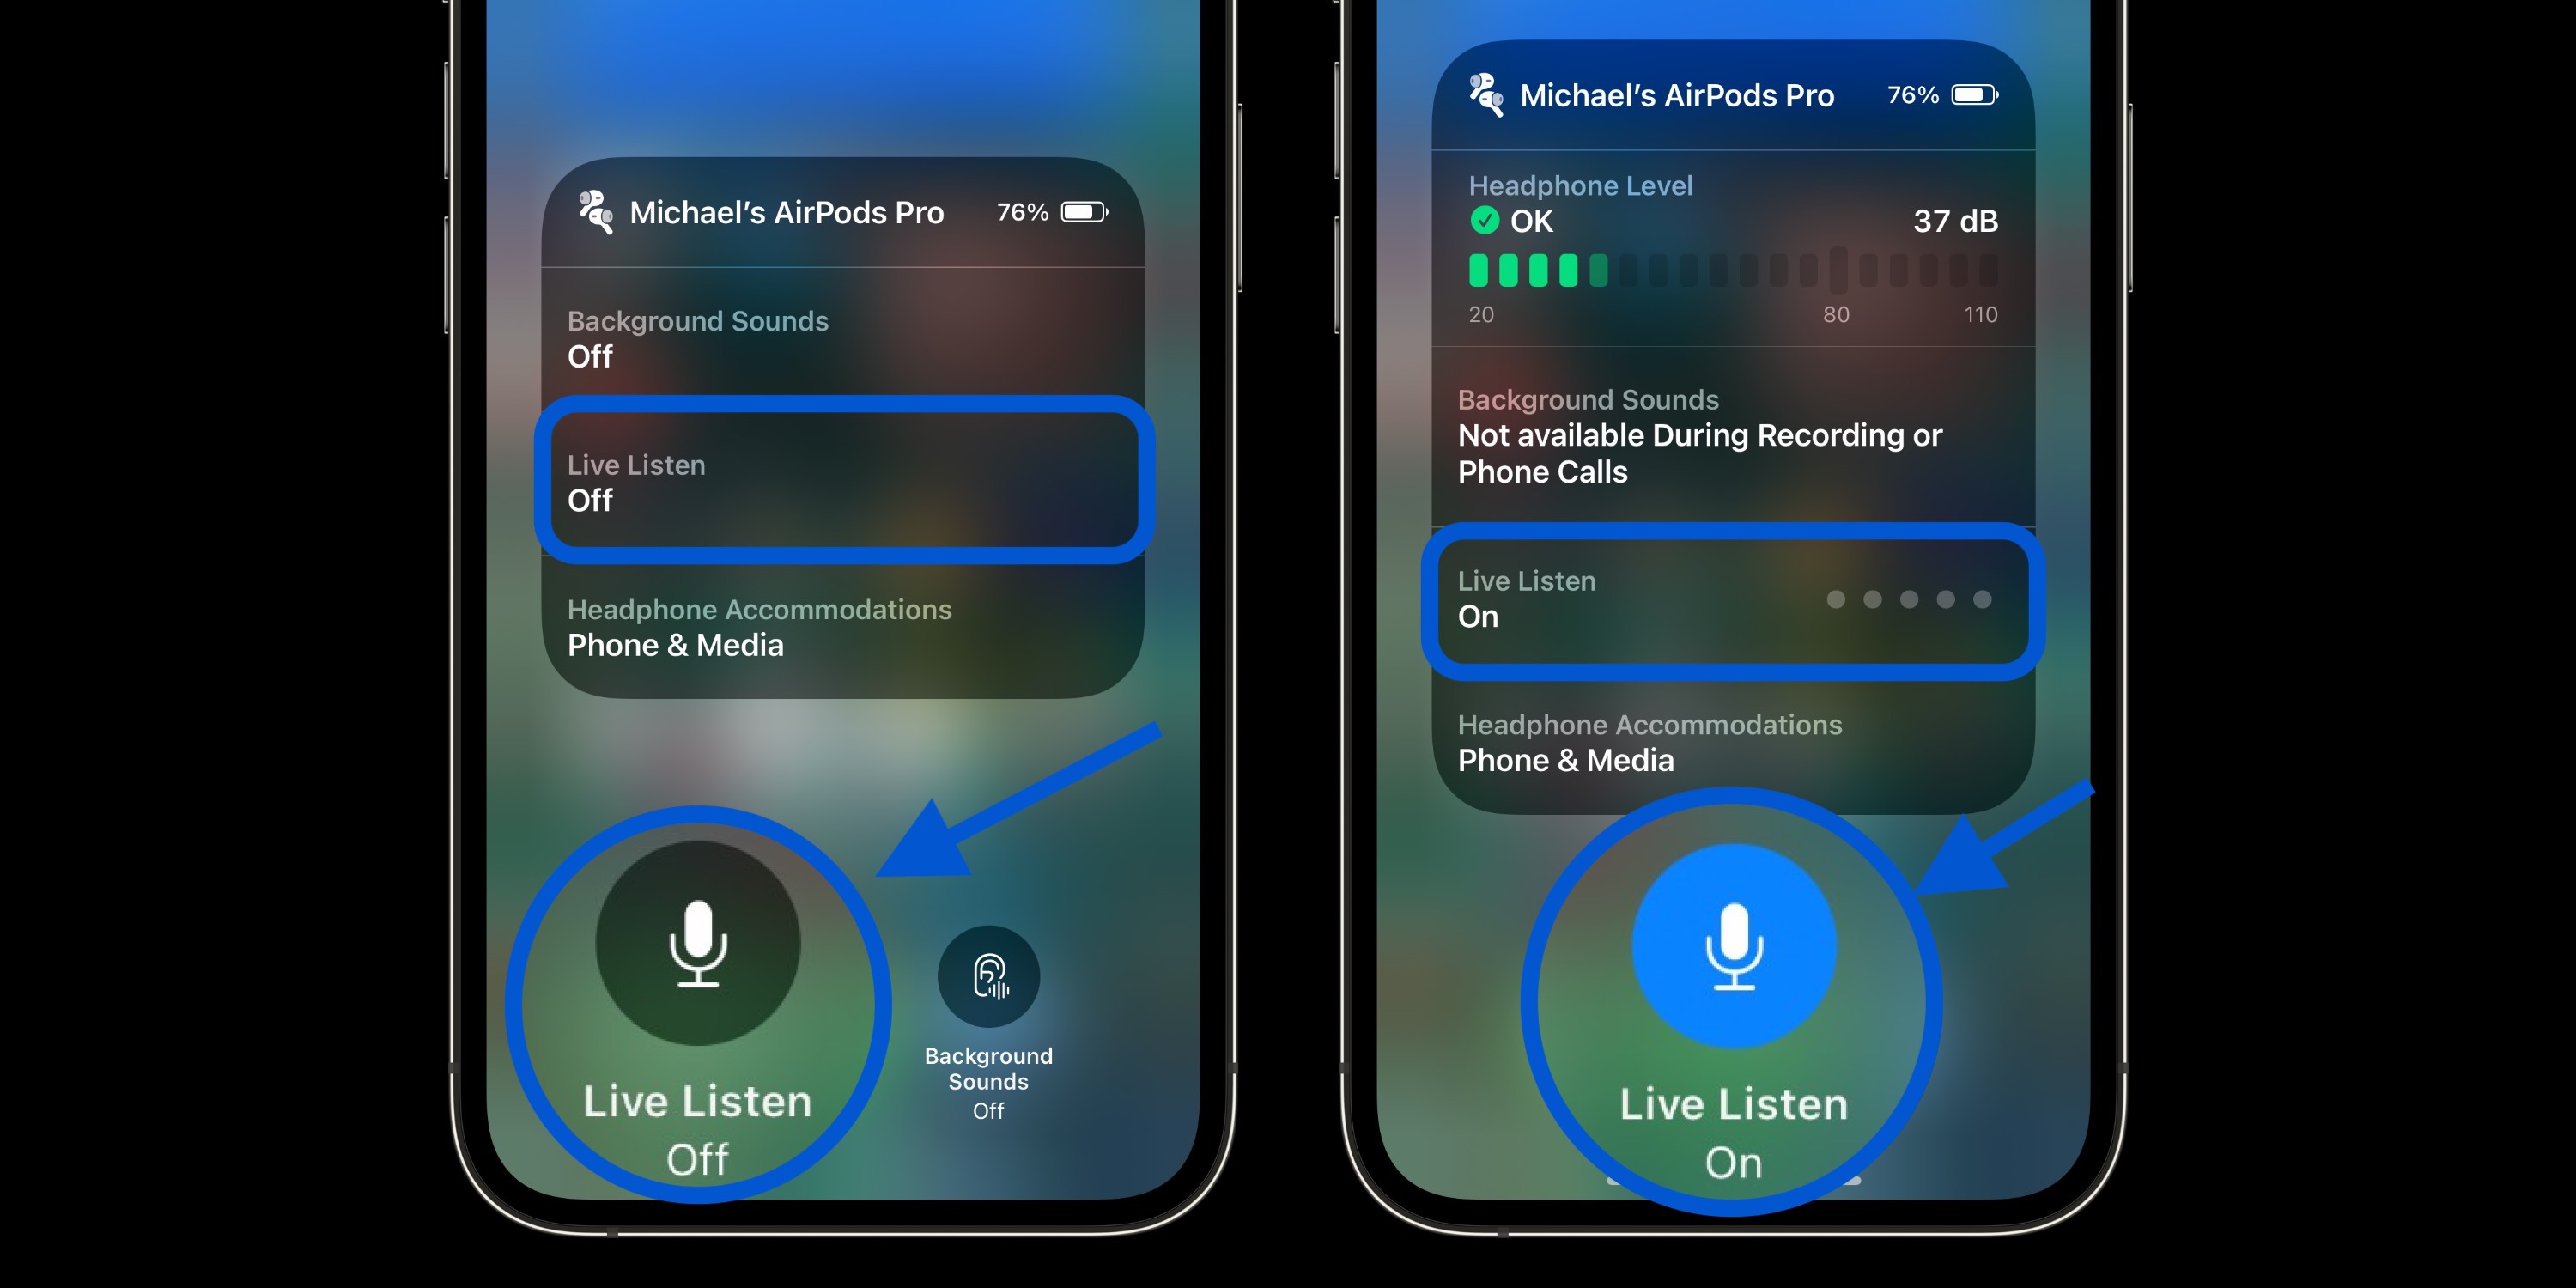 How to check decibel levels with iPhone and Apple Watch - Open Control Center on iPhone > look for Ear icon tile > tap Live Listen to get ambient decibel level